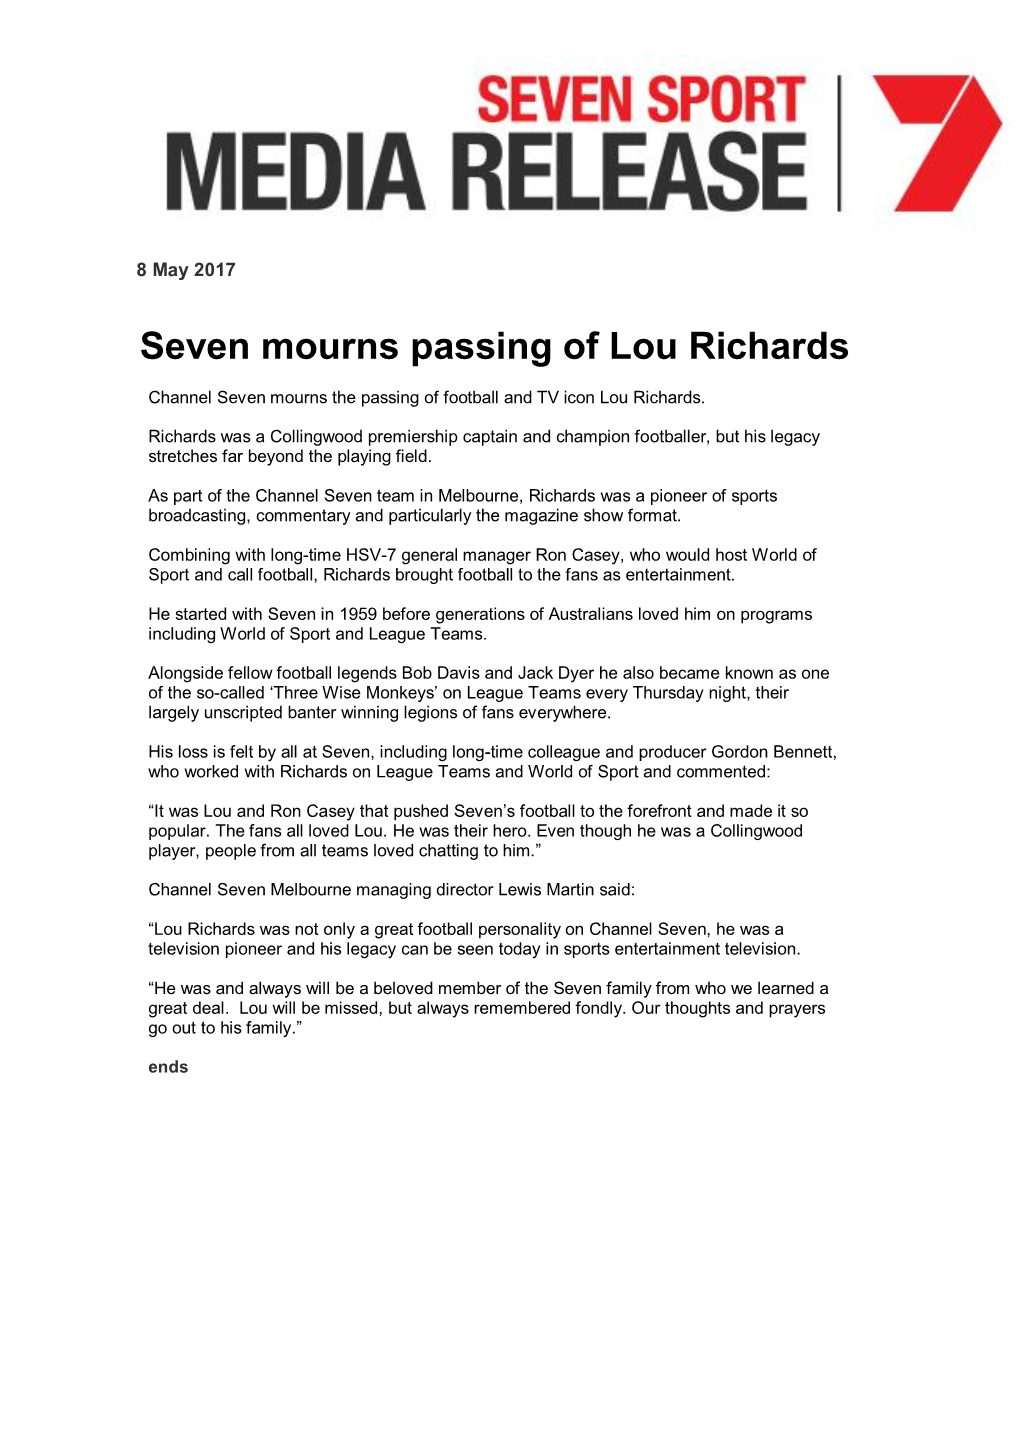 Seven Mourns Passing of Lou Richards